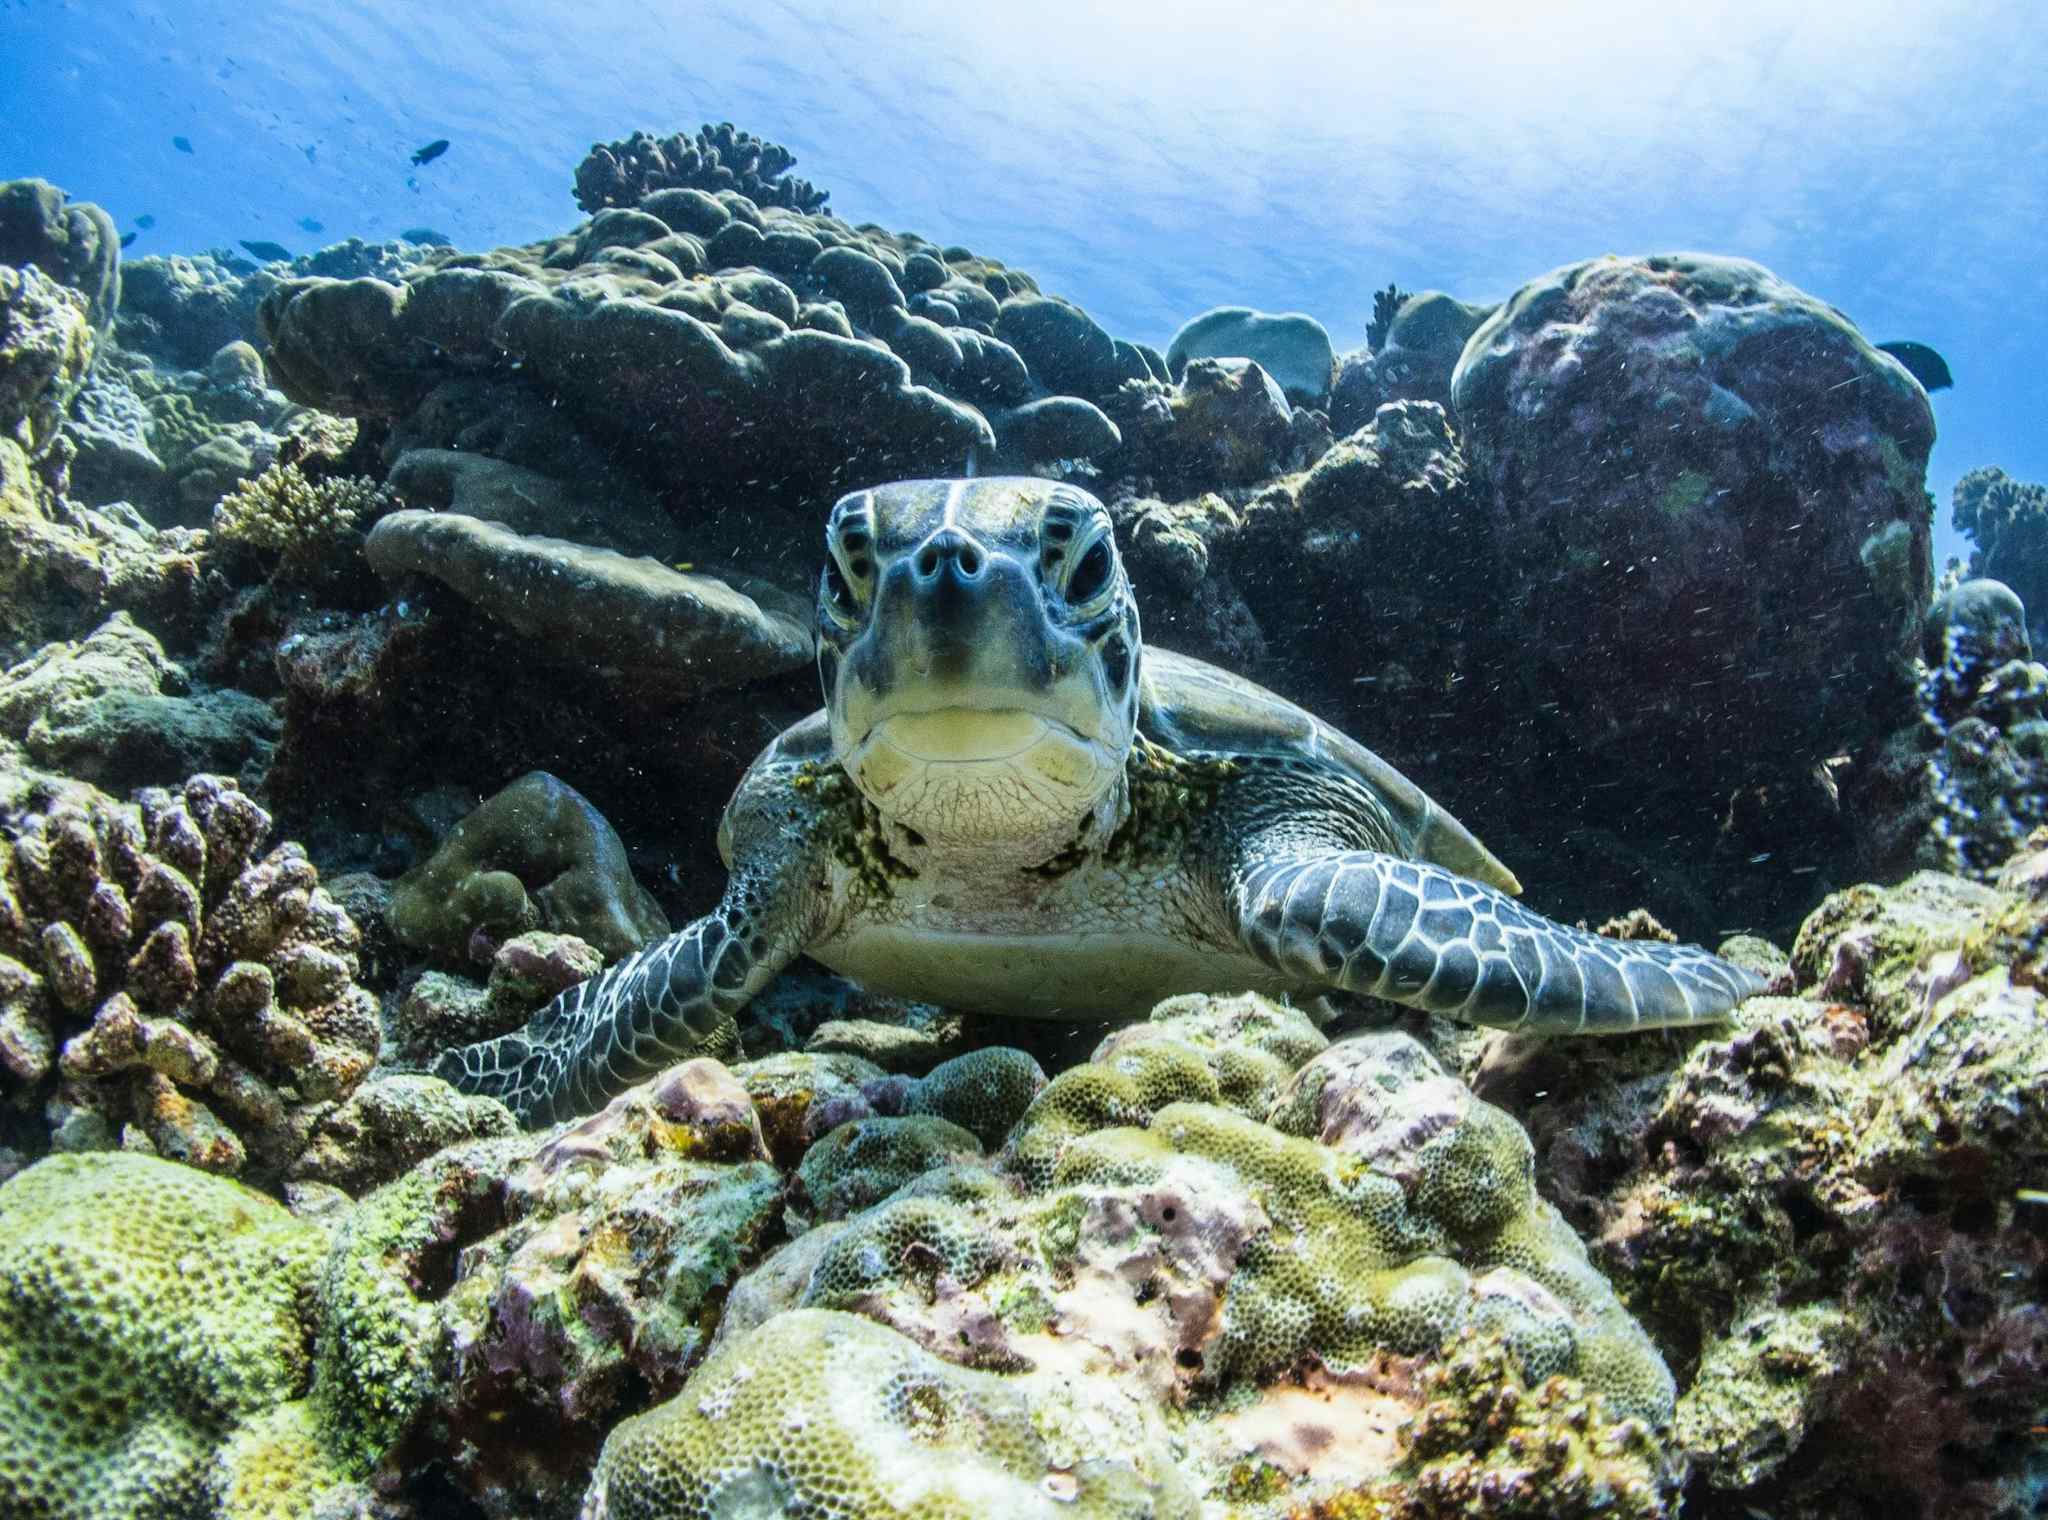 Underwater shot of a sea turtle among coral.